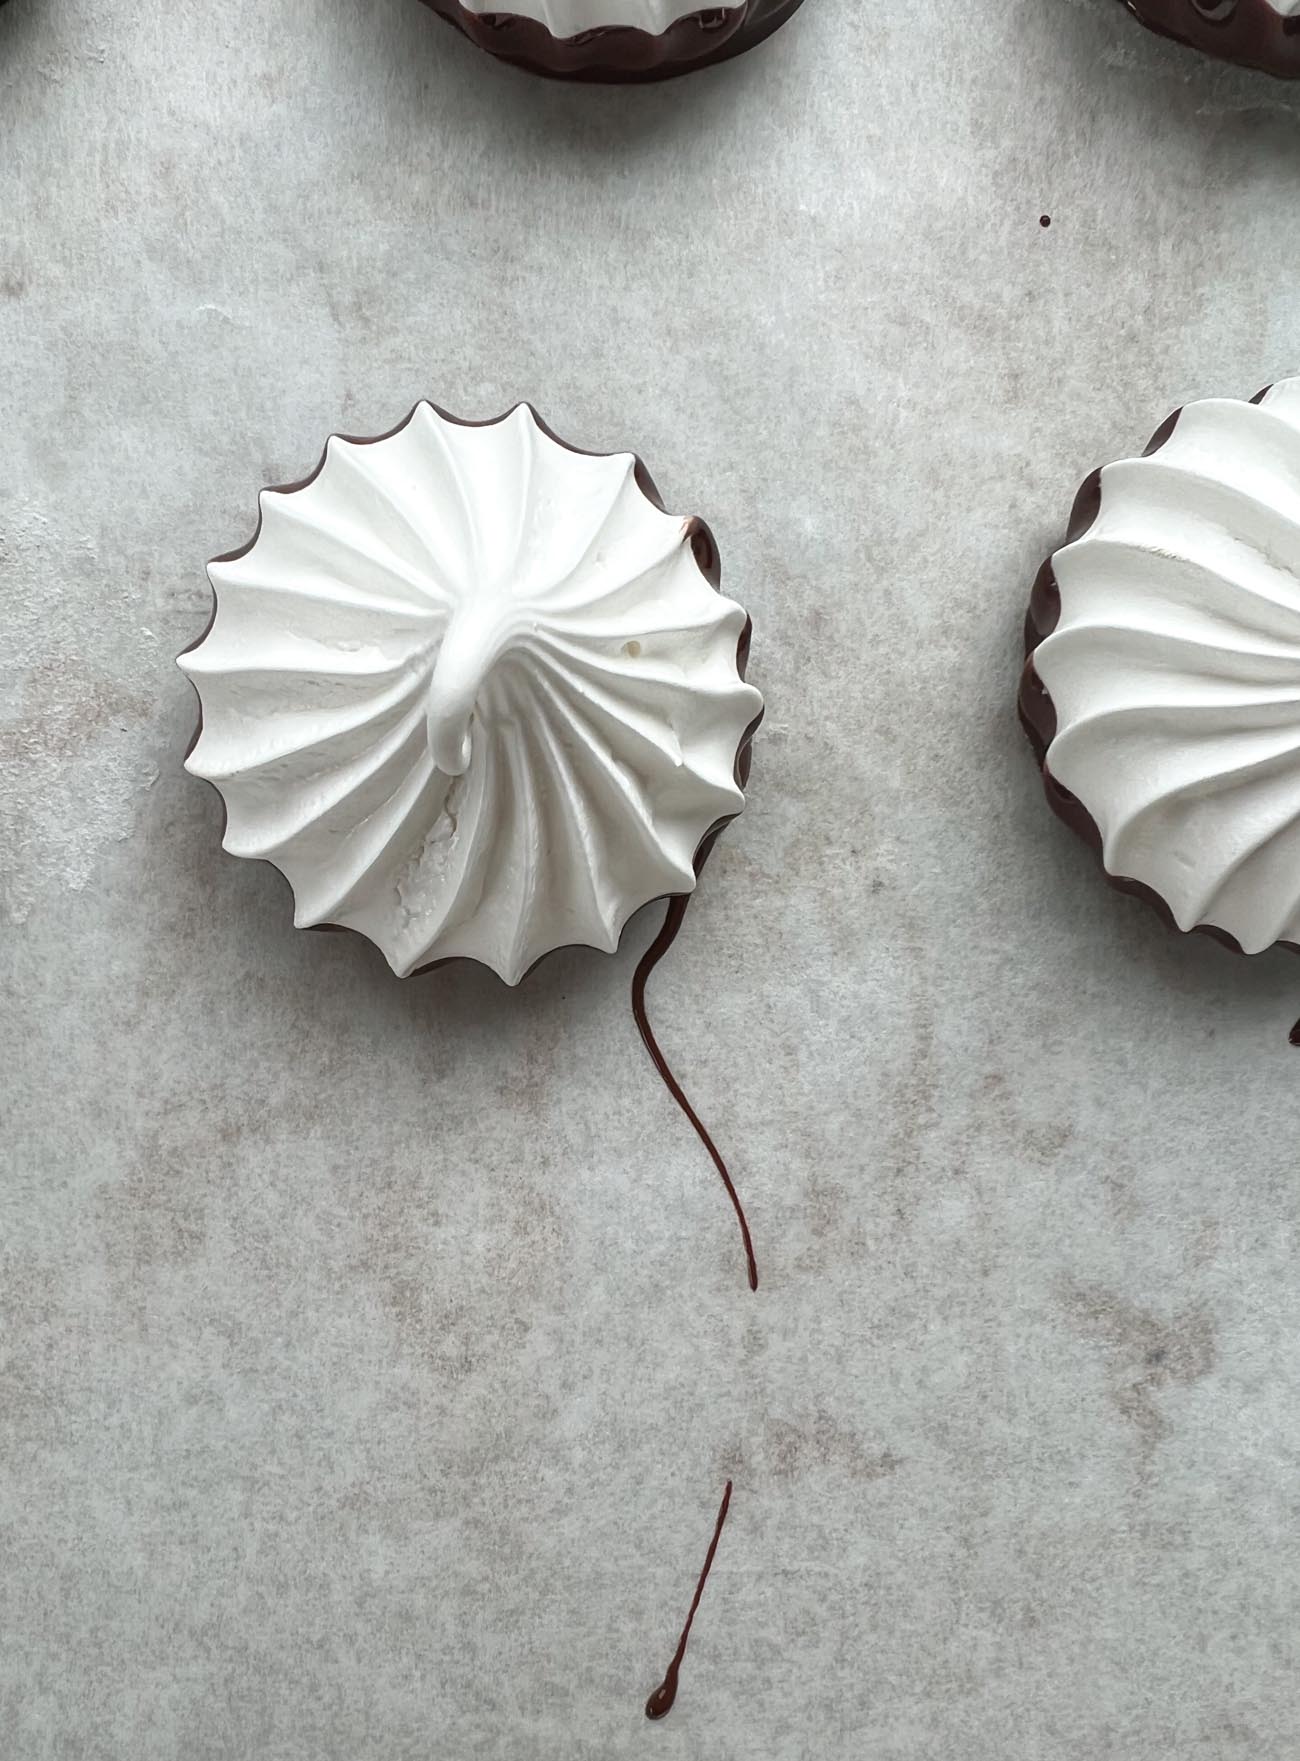 chocolate dipped meringue cookies on parchment paper